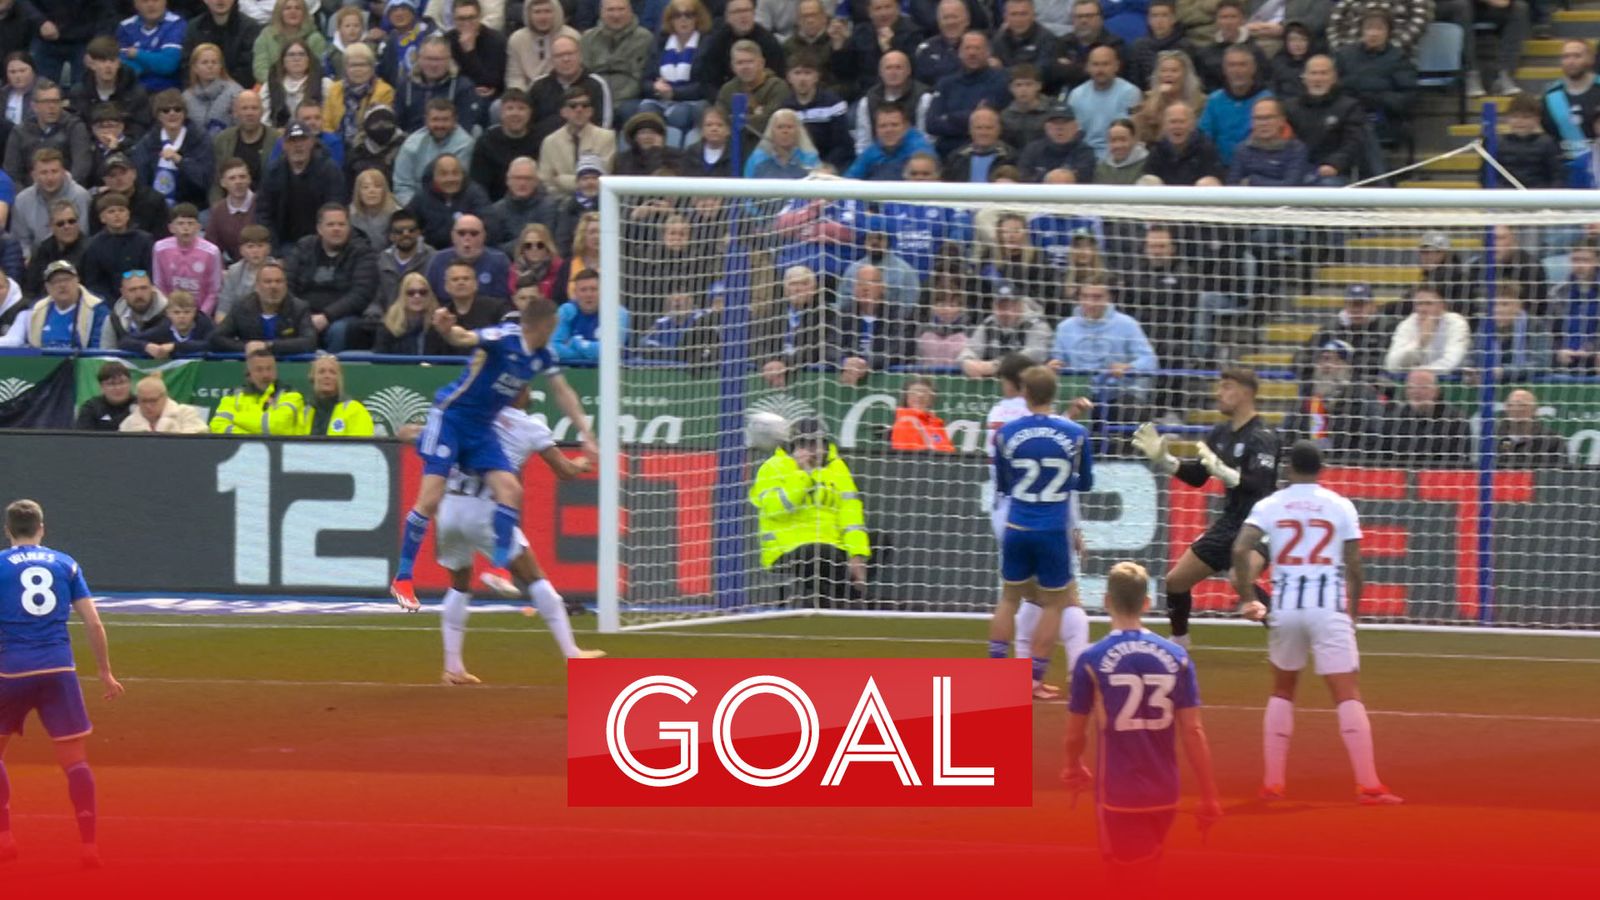 Redemption for Vardy! Striker puts Leicester 2-0 up